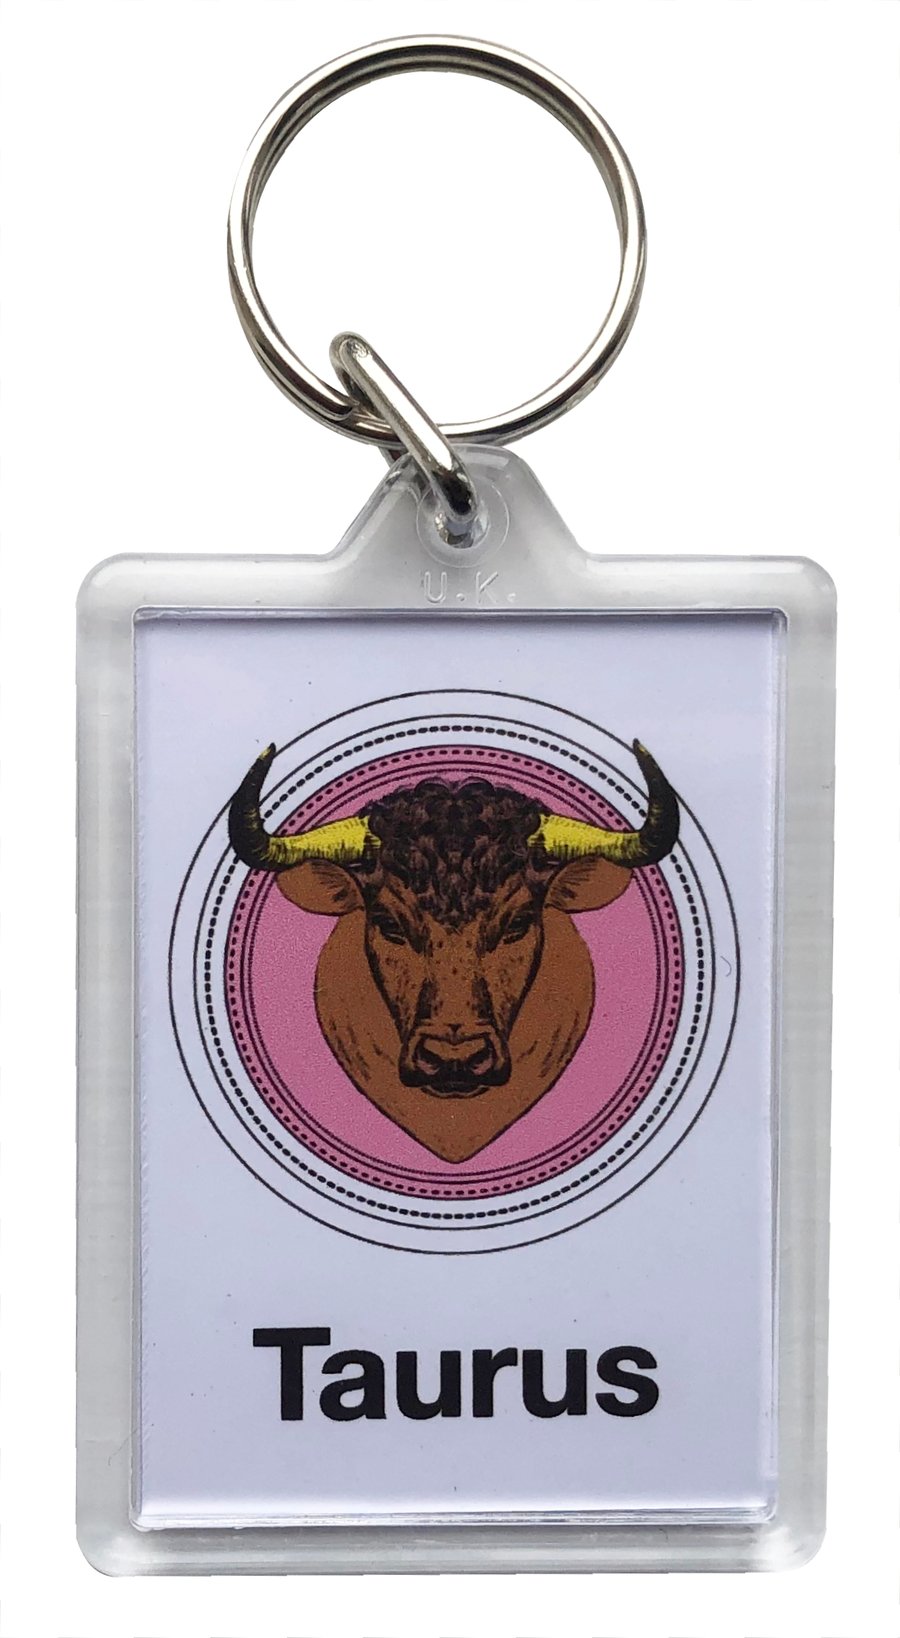 Taurus Keyring with a 50 x35mm Insert - The Bull (21st April - 21st May) 